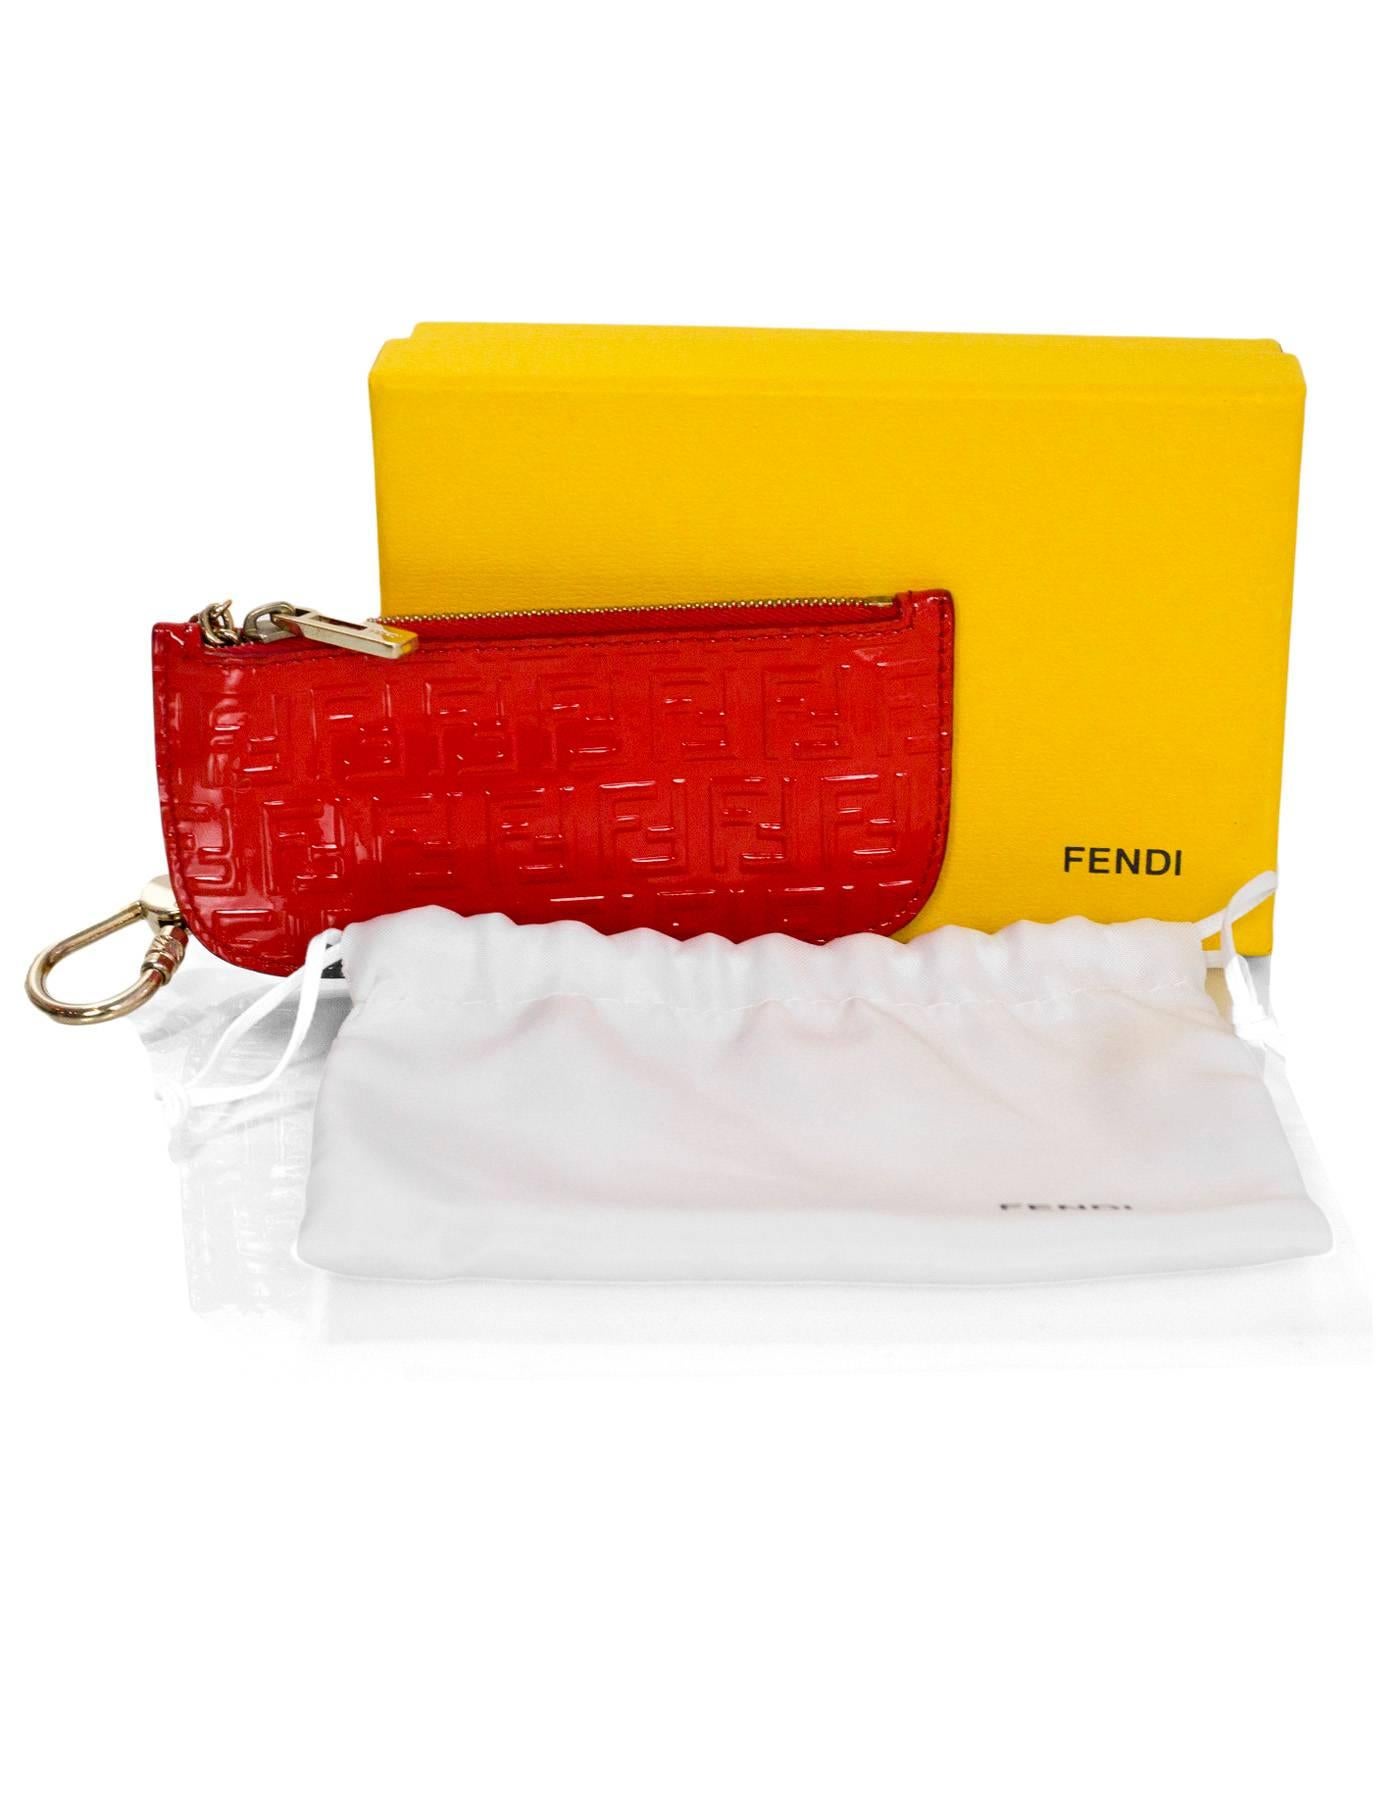 Fendi Red Patent Leather Card Case/Key Chain with Box and DB 4